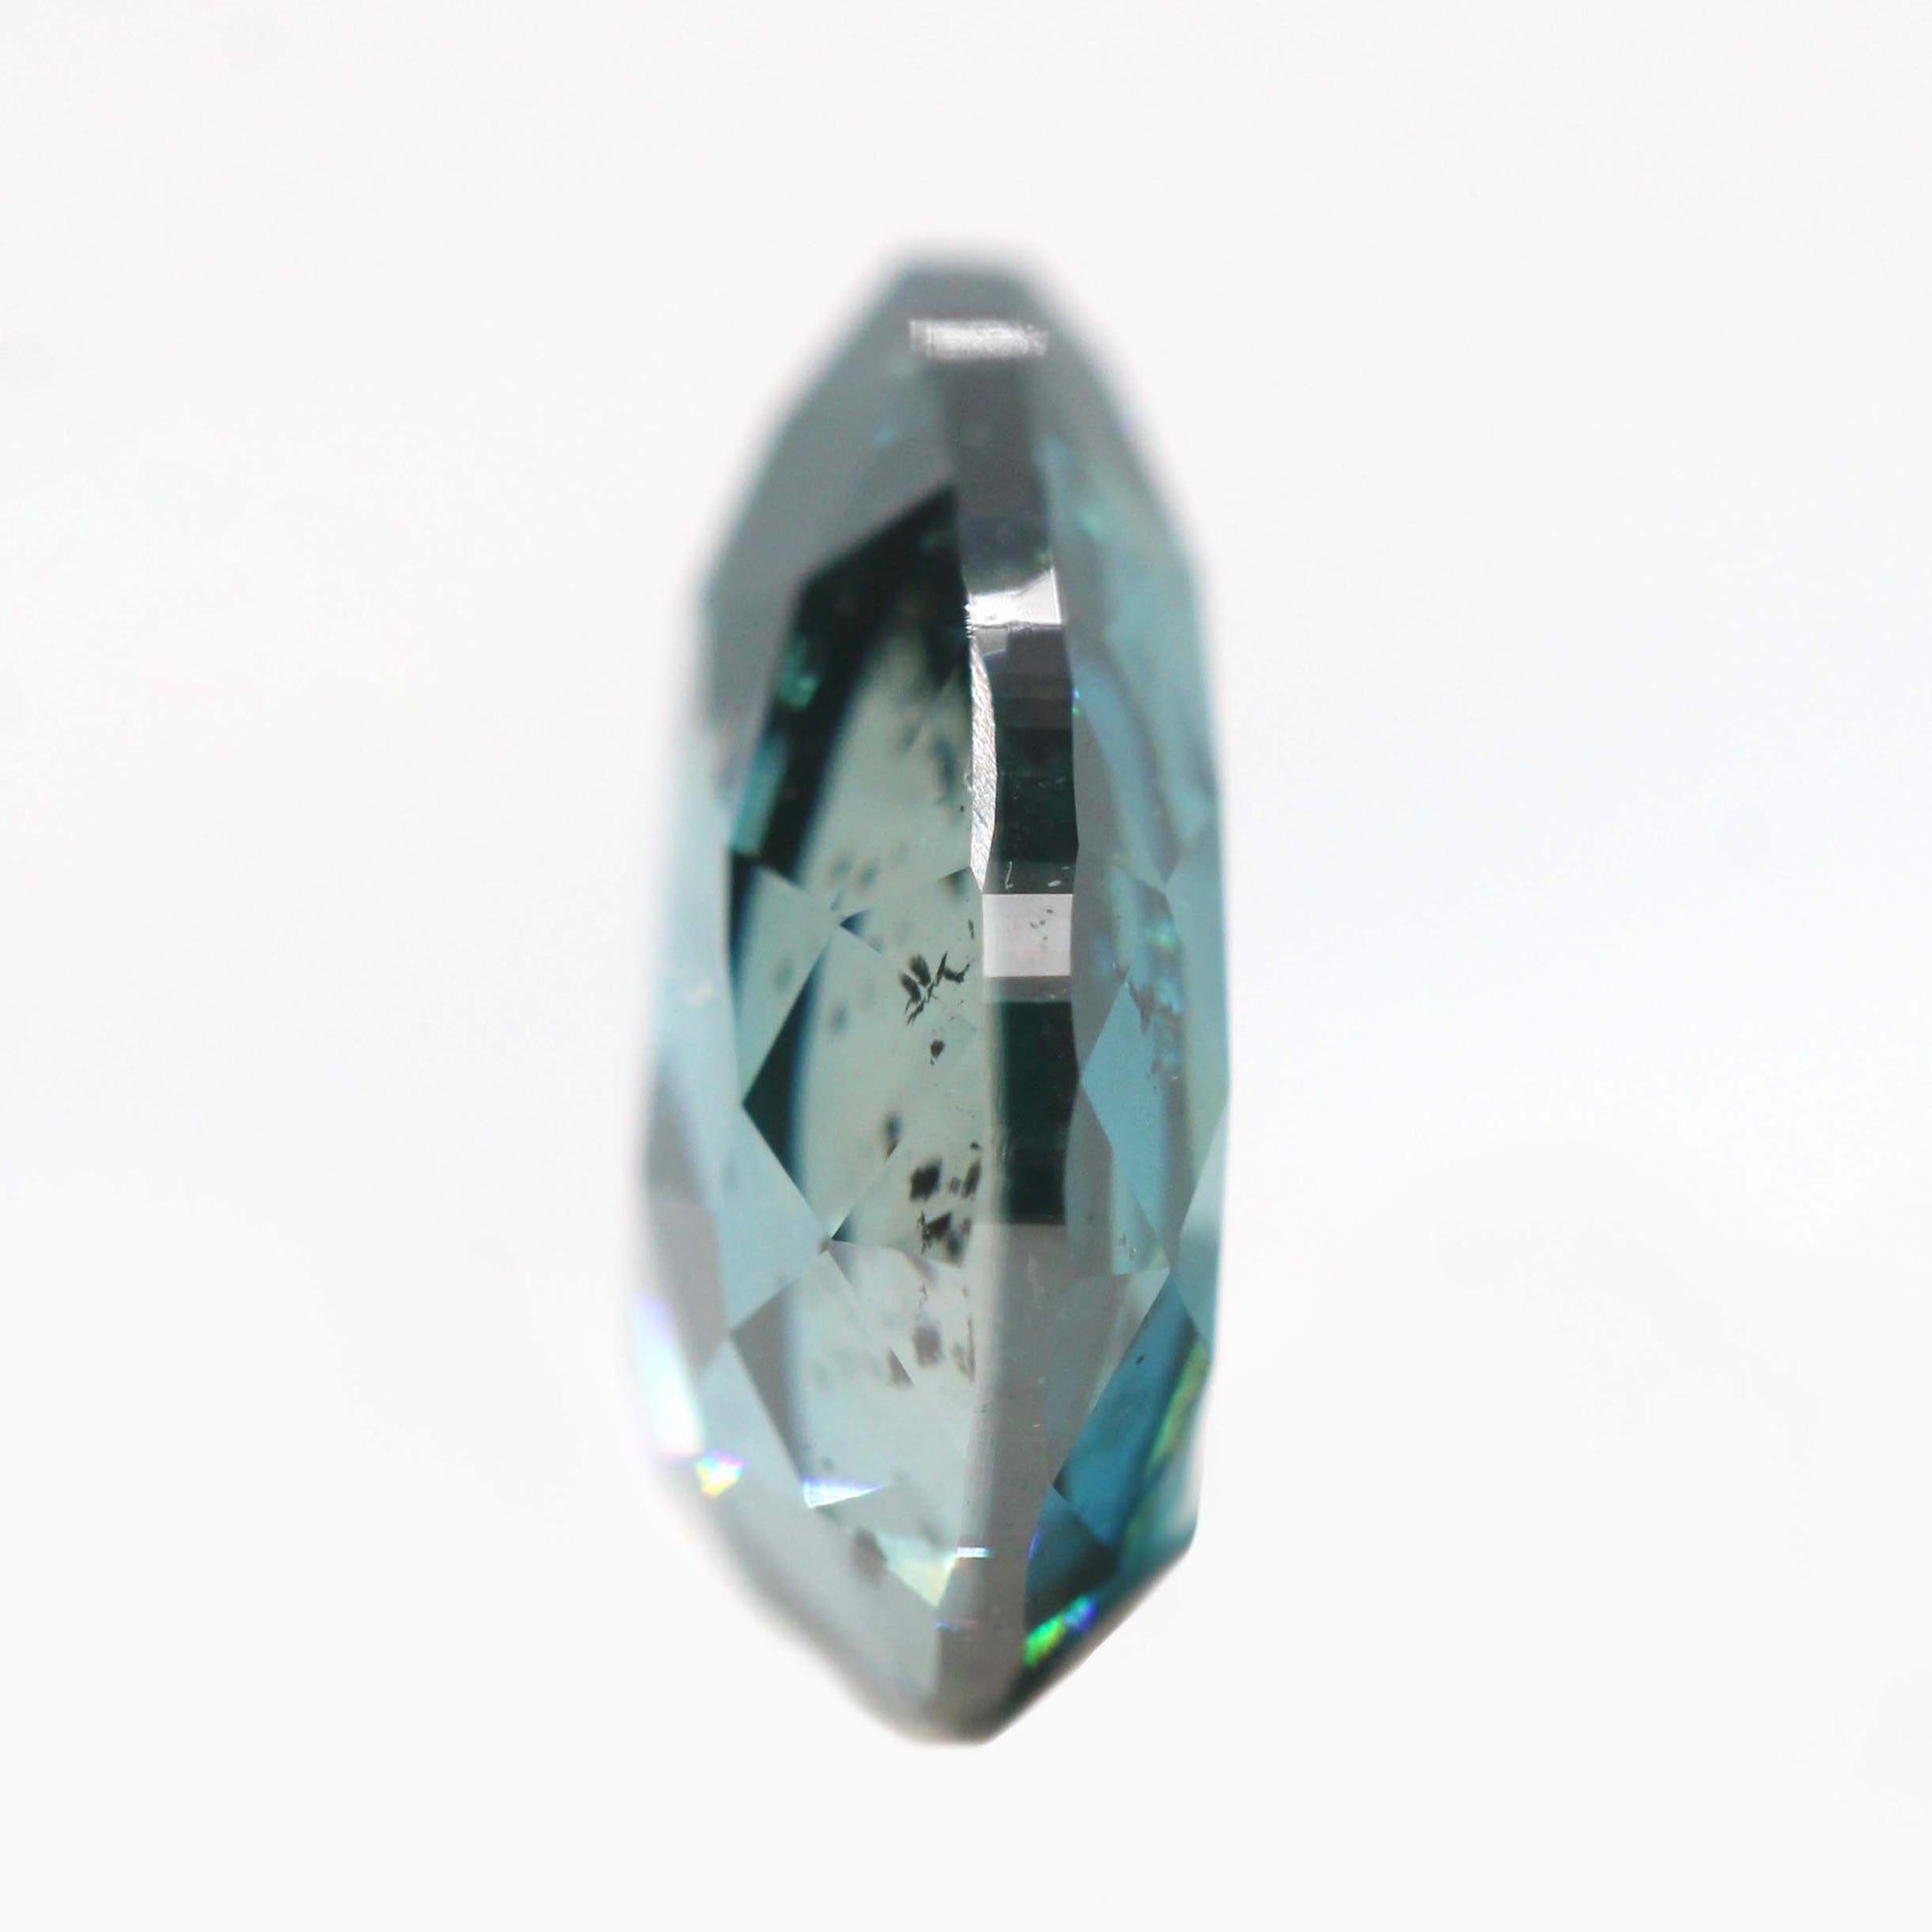 1.20 Carat Rose or Brilliant Cut Clear Teal Pear Diamond for Custom Work - Inventory Code TPD120 - Midwinter Co. Alternative Bridal Rings and Modern Fine Jewelry